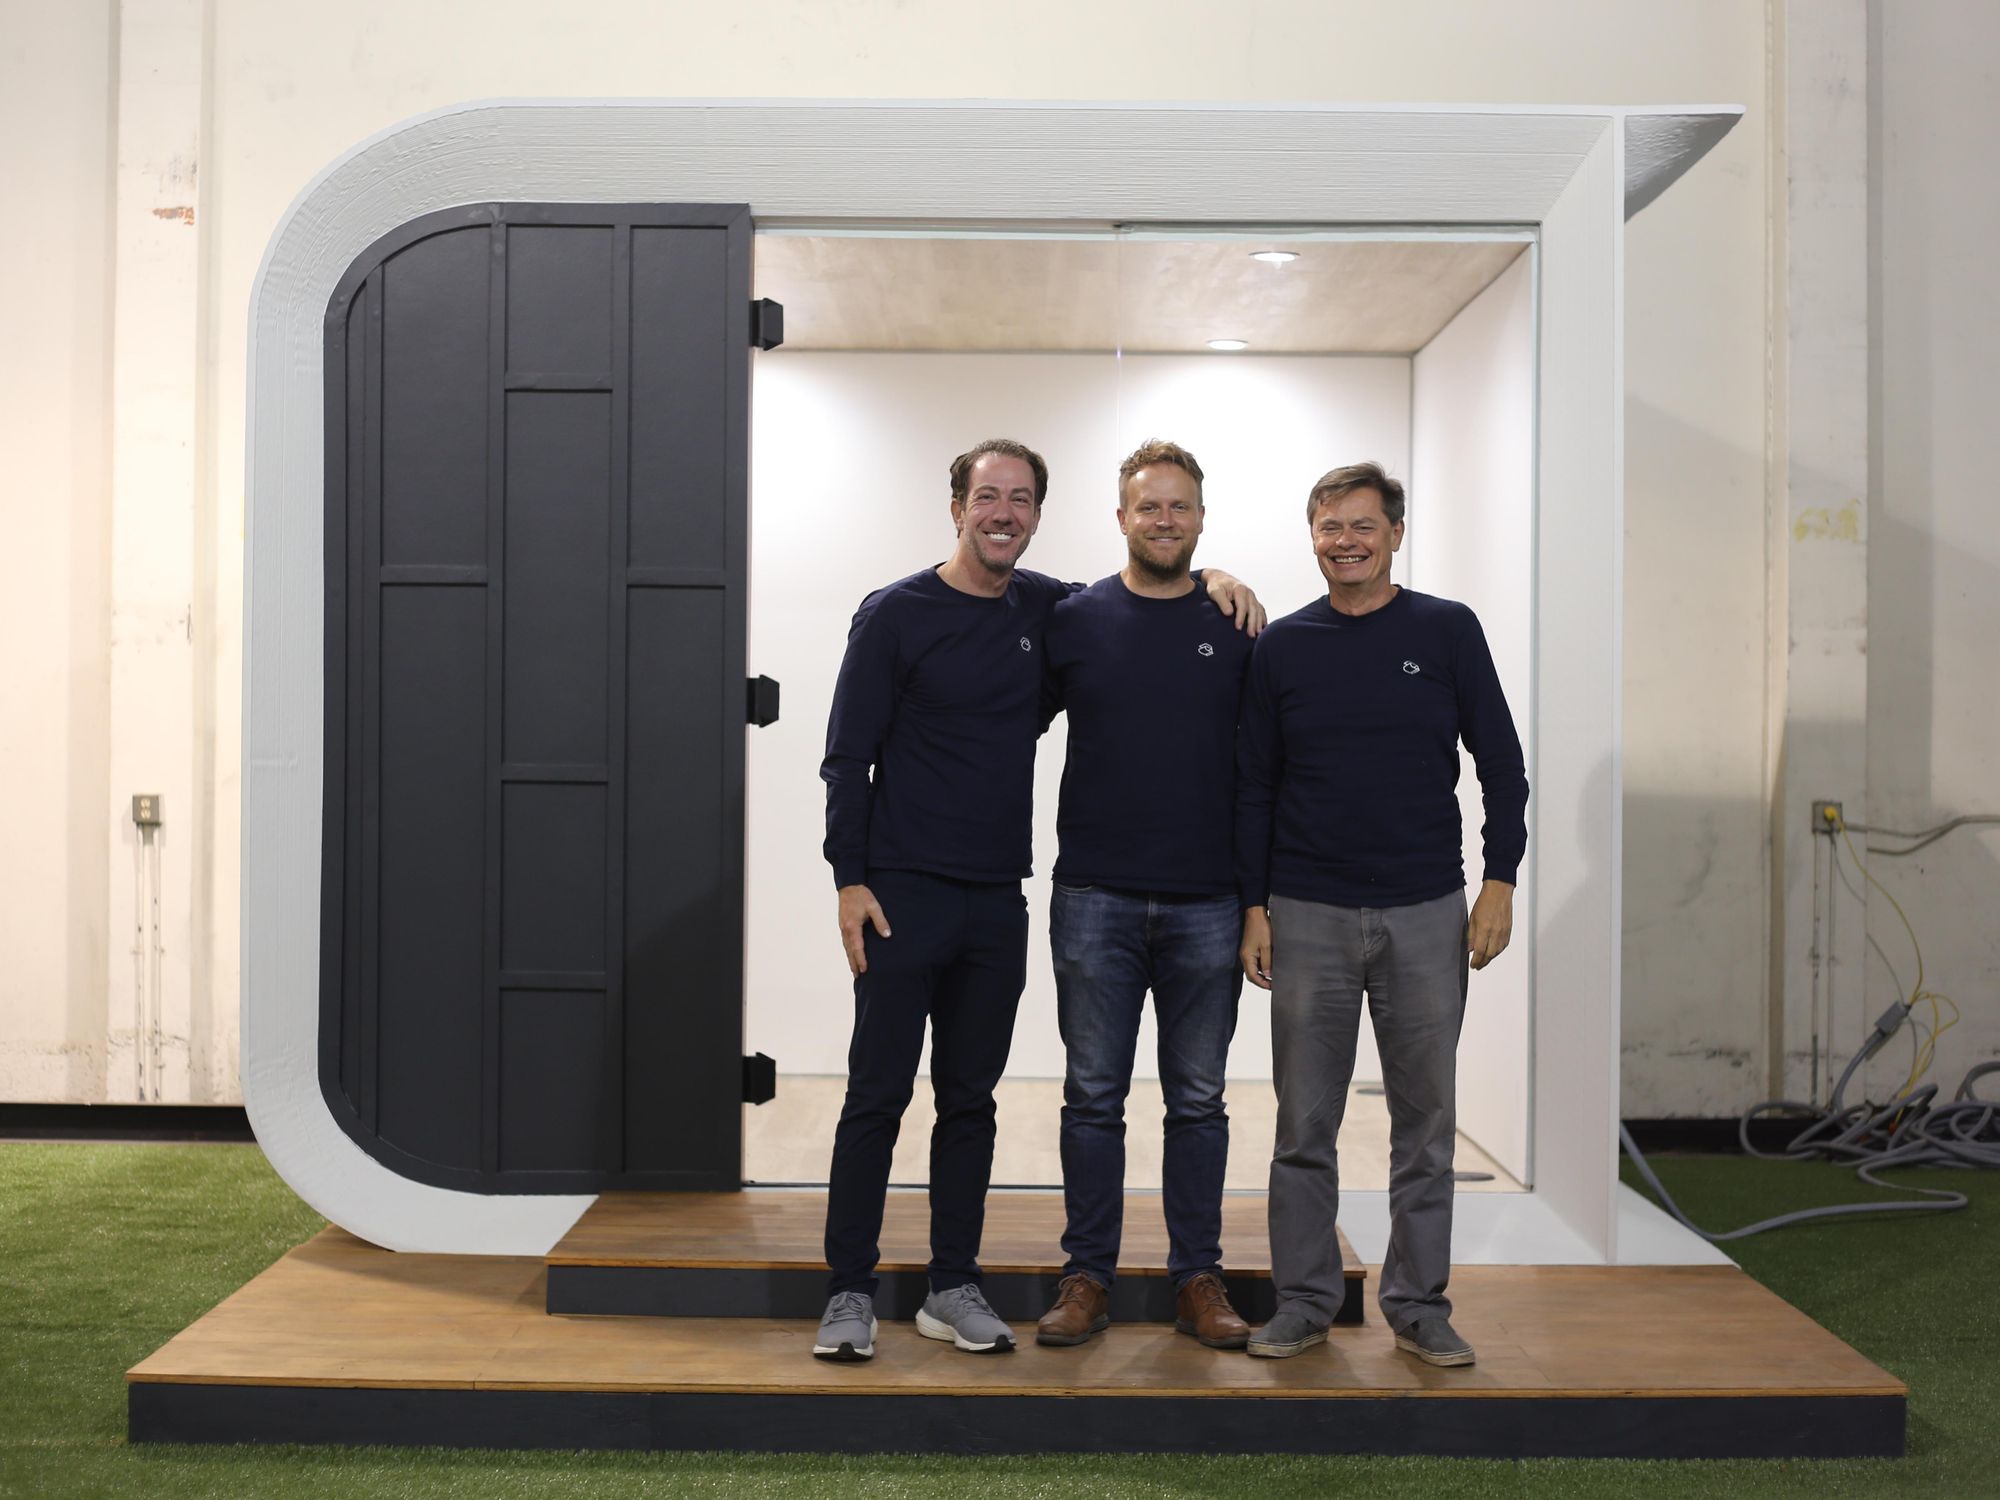 https://dot.la/media-library/head-of-growth-ron-barnoy-ceo-ross-maguire-and-gene-eidelman-stand-in-front-of-the-first-azure-3d-printed-studio.jpg?id=29905386&width=2000&height=1500&quality=85&coordinates=307%2C0%2C301%2C0